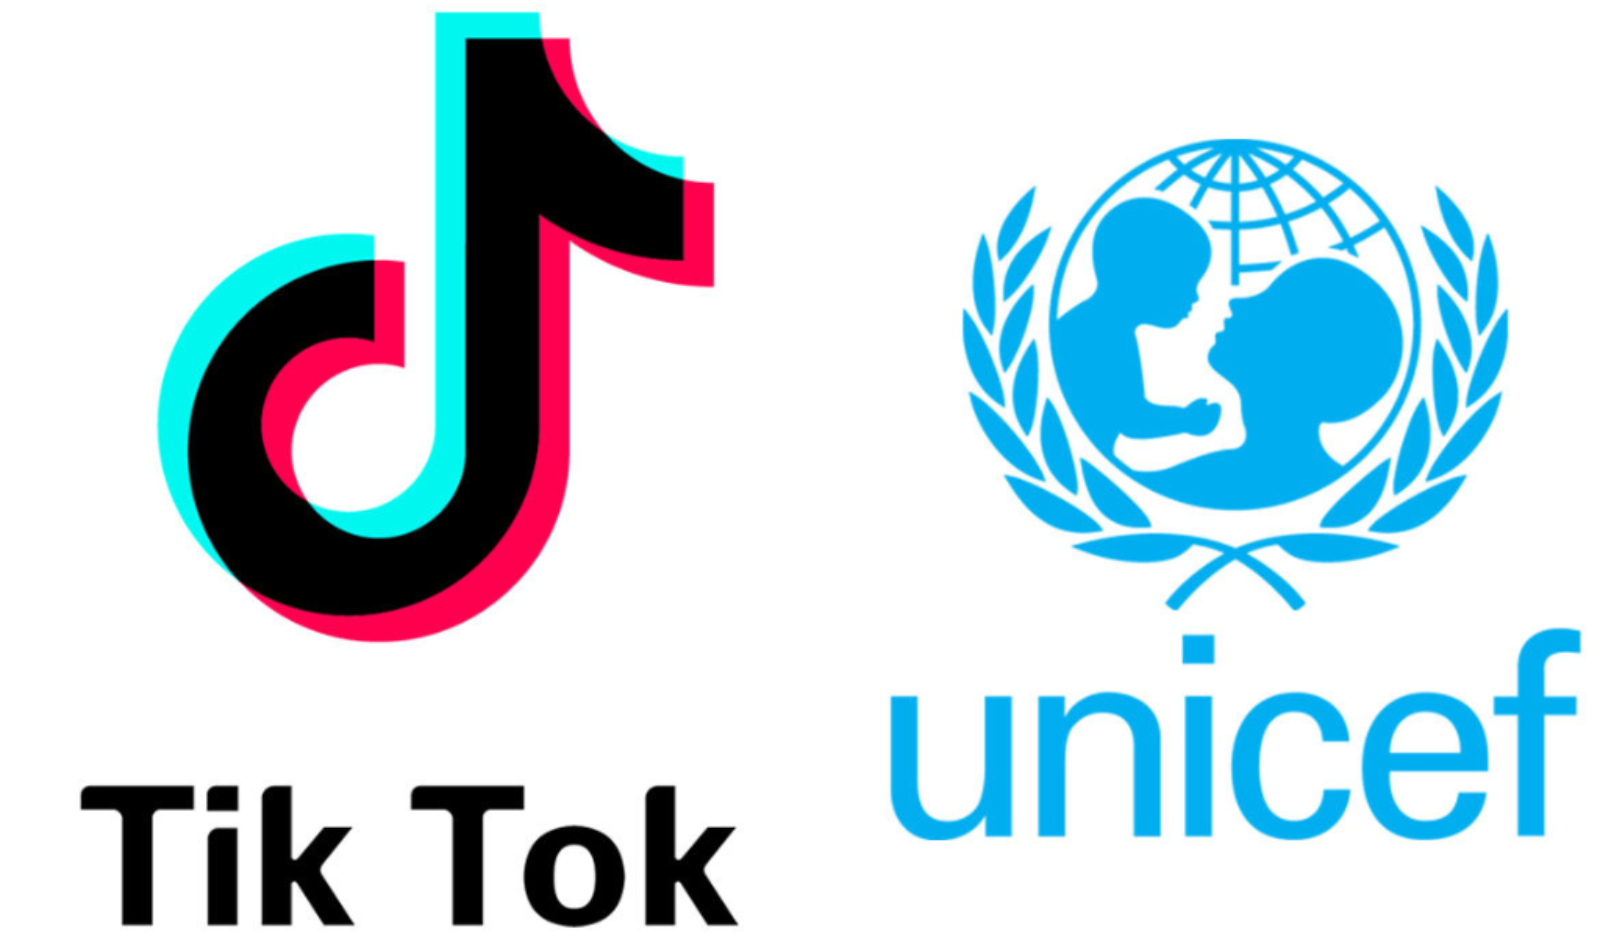 TikTok Helped UNICEF Gather Funds of $200,000 for the Welfare of Children –